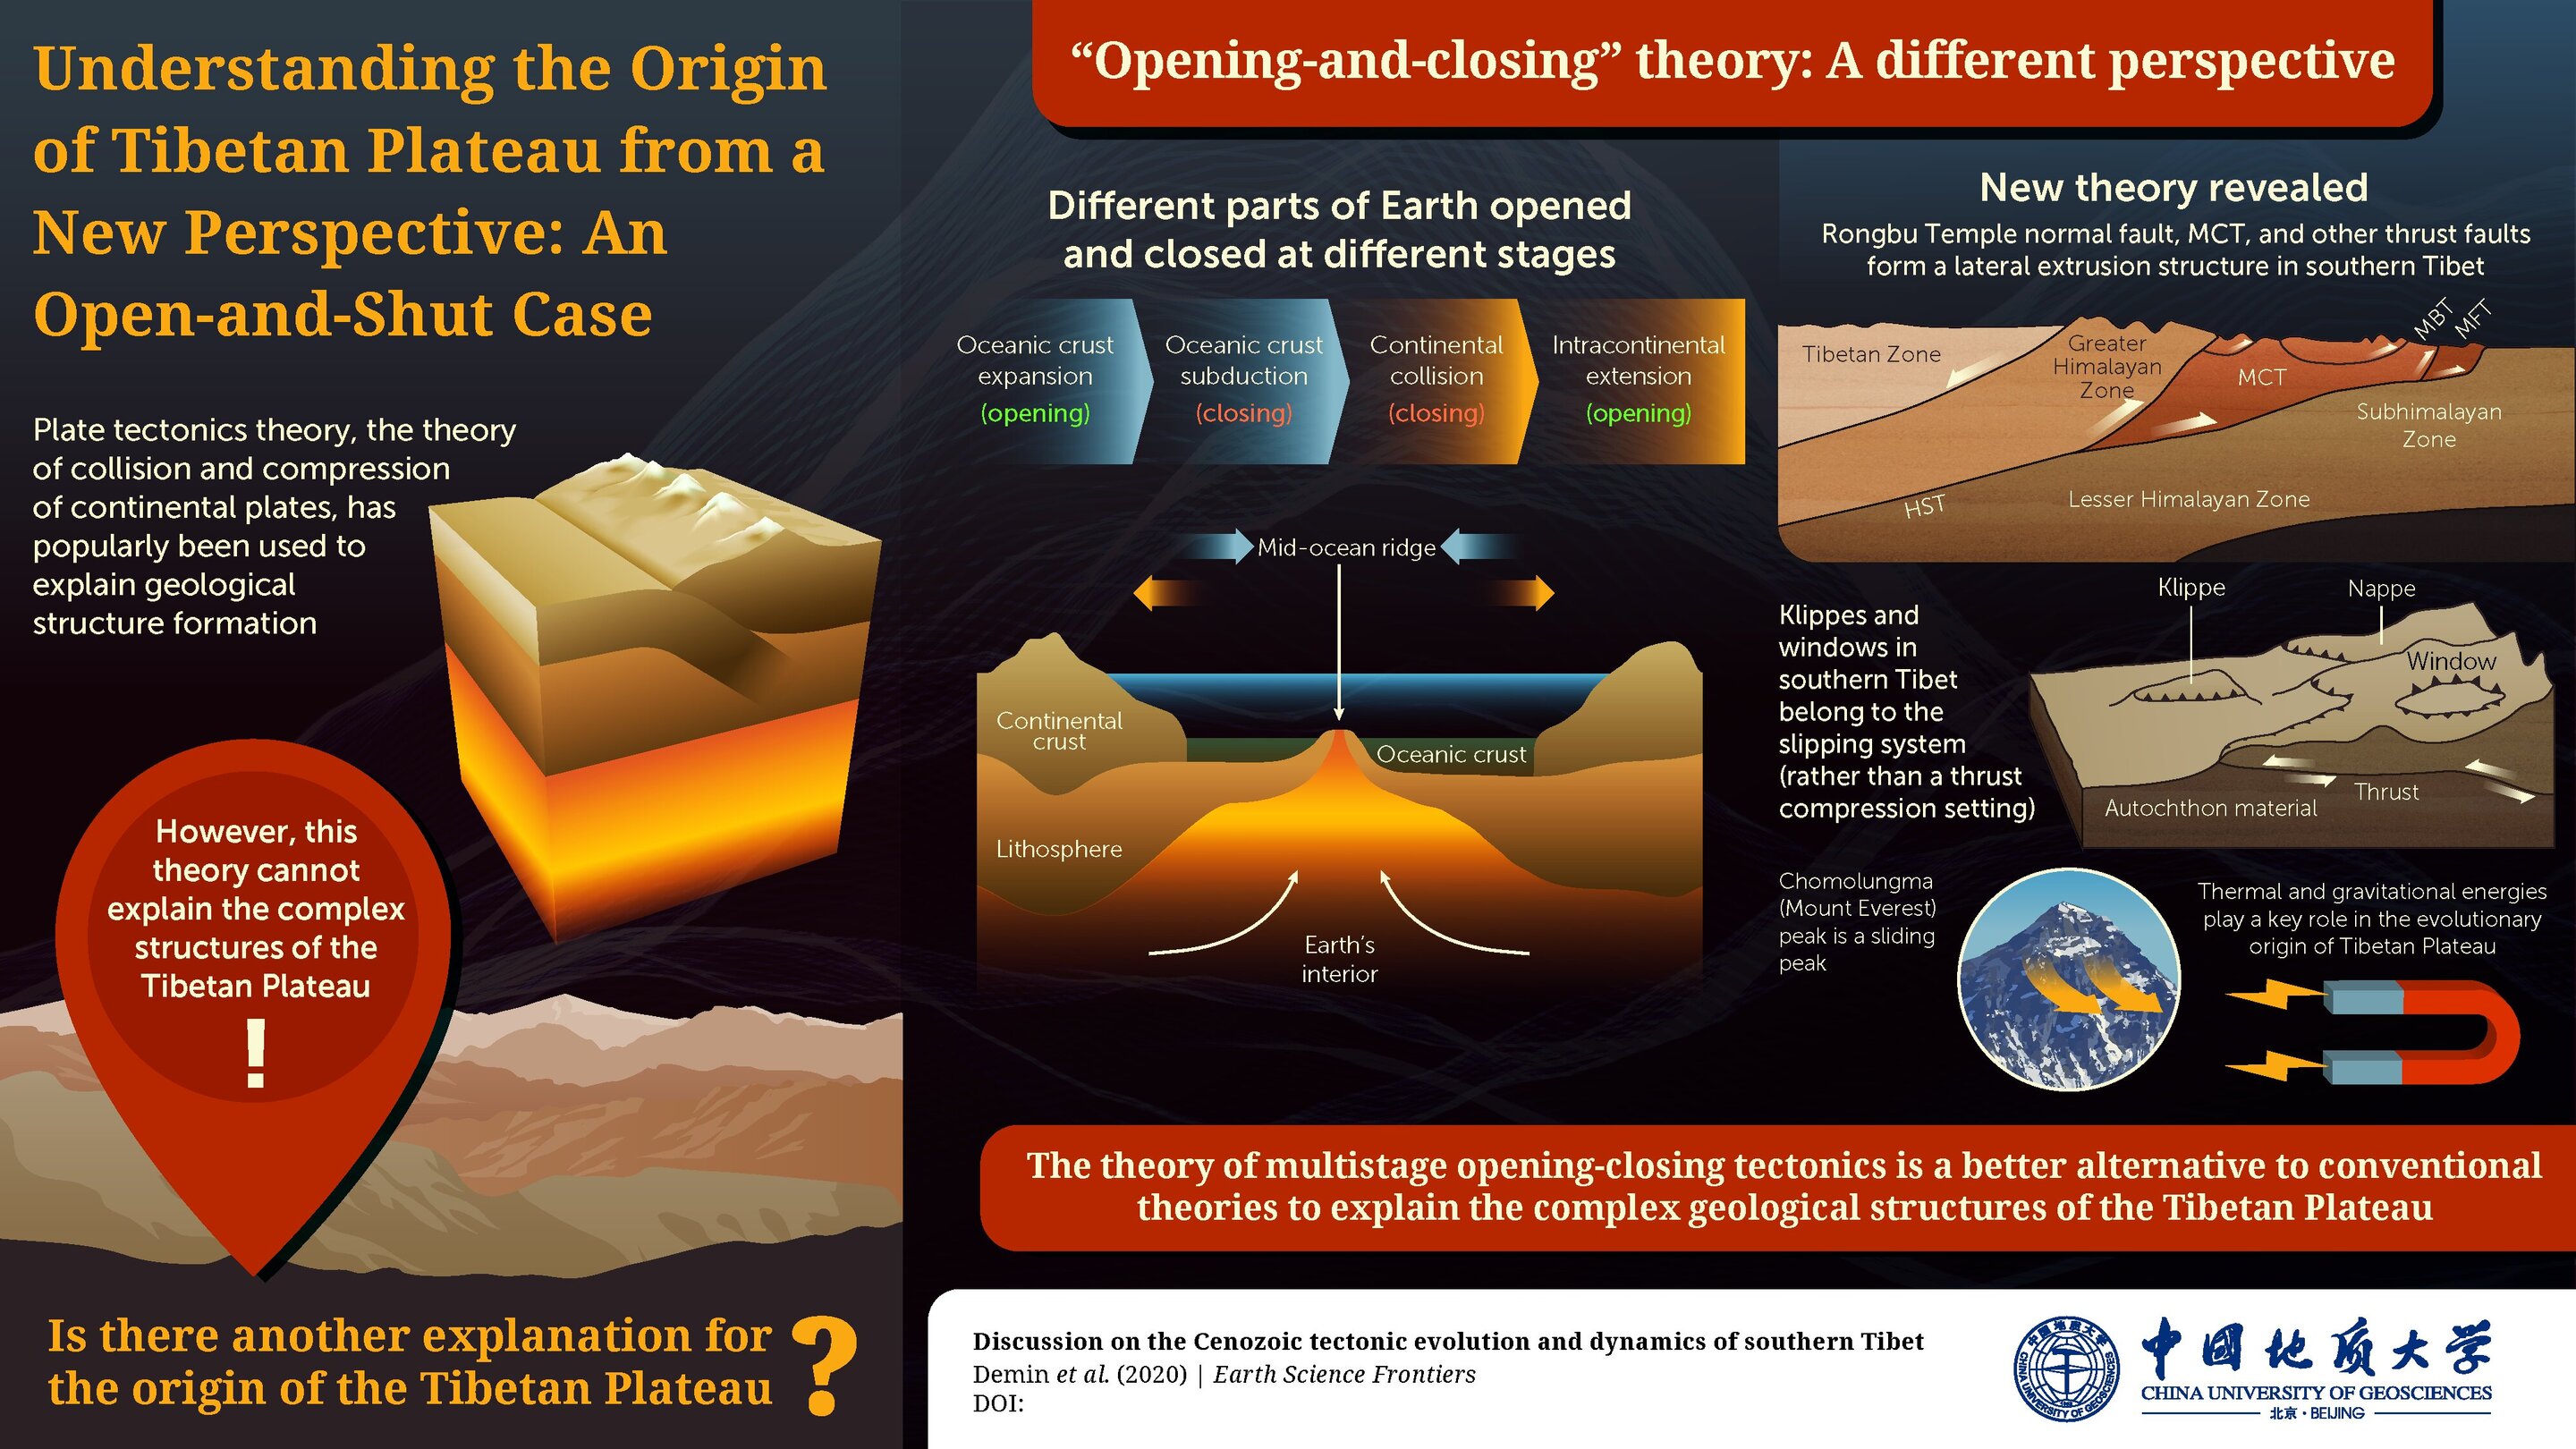 Soeverein krans ader Geologists shed light on the Tibetan Plateau origin puzzle: an  open-and-shut perspective